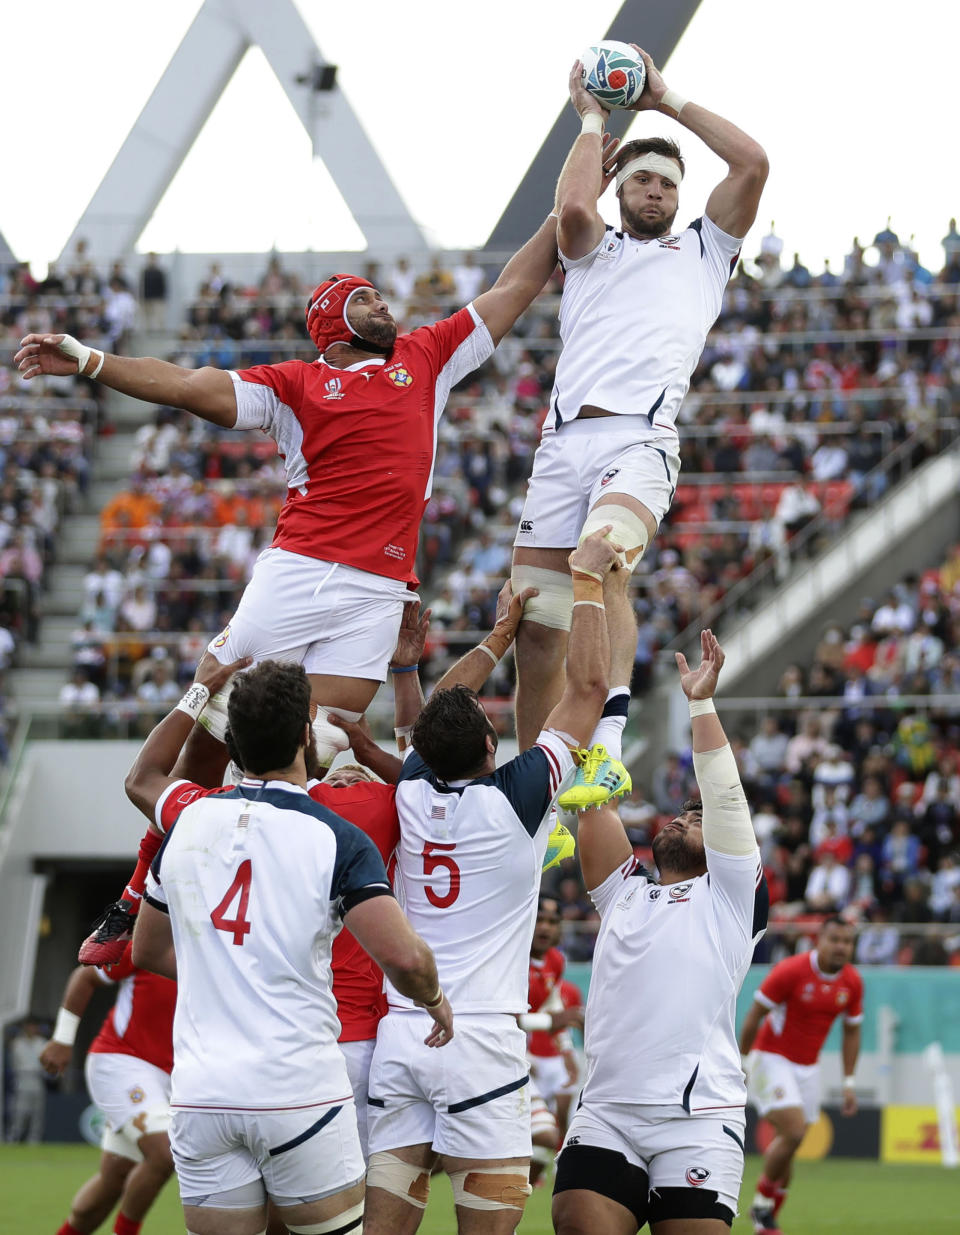 United States' Cam Dolan wins the lineout ball during the Rugby World Cup Pool C game at Hanazono Rugby Stadium between USA and Tonga in Osaka, Japan, Sunday, Oct. 13, 2019. (Kyodo News via AP)